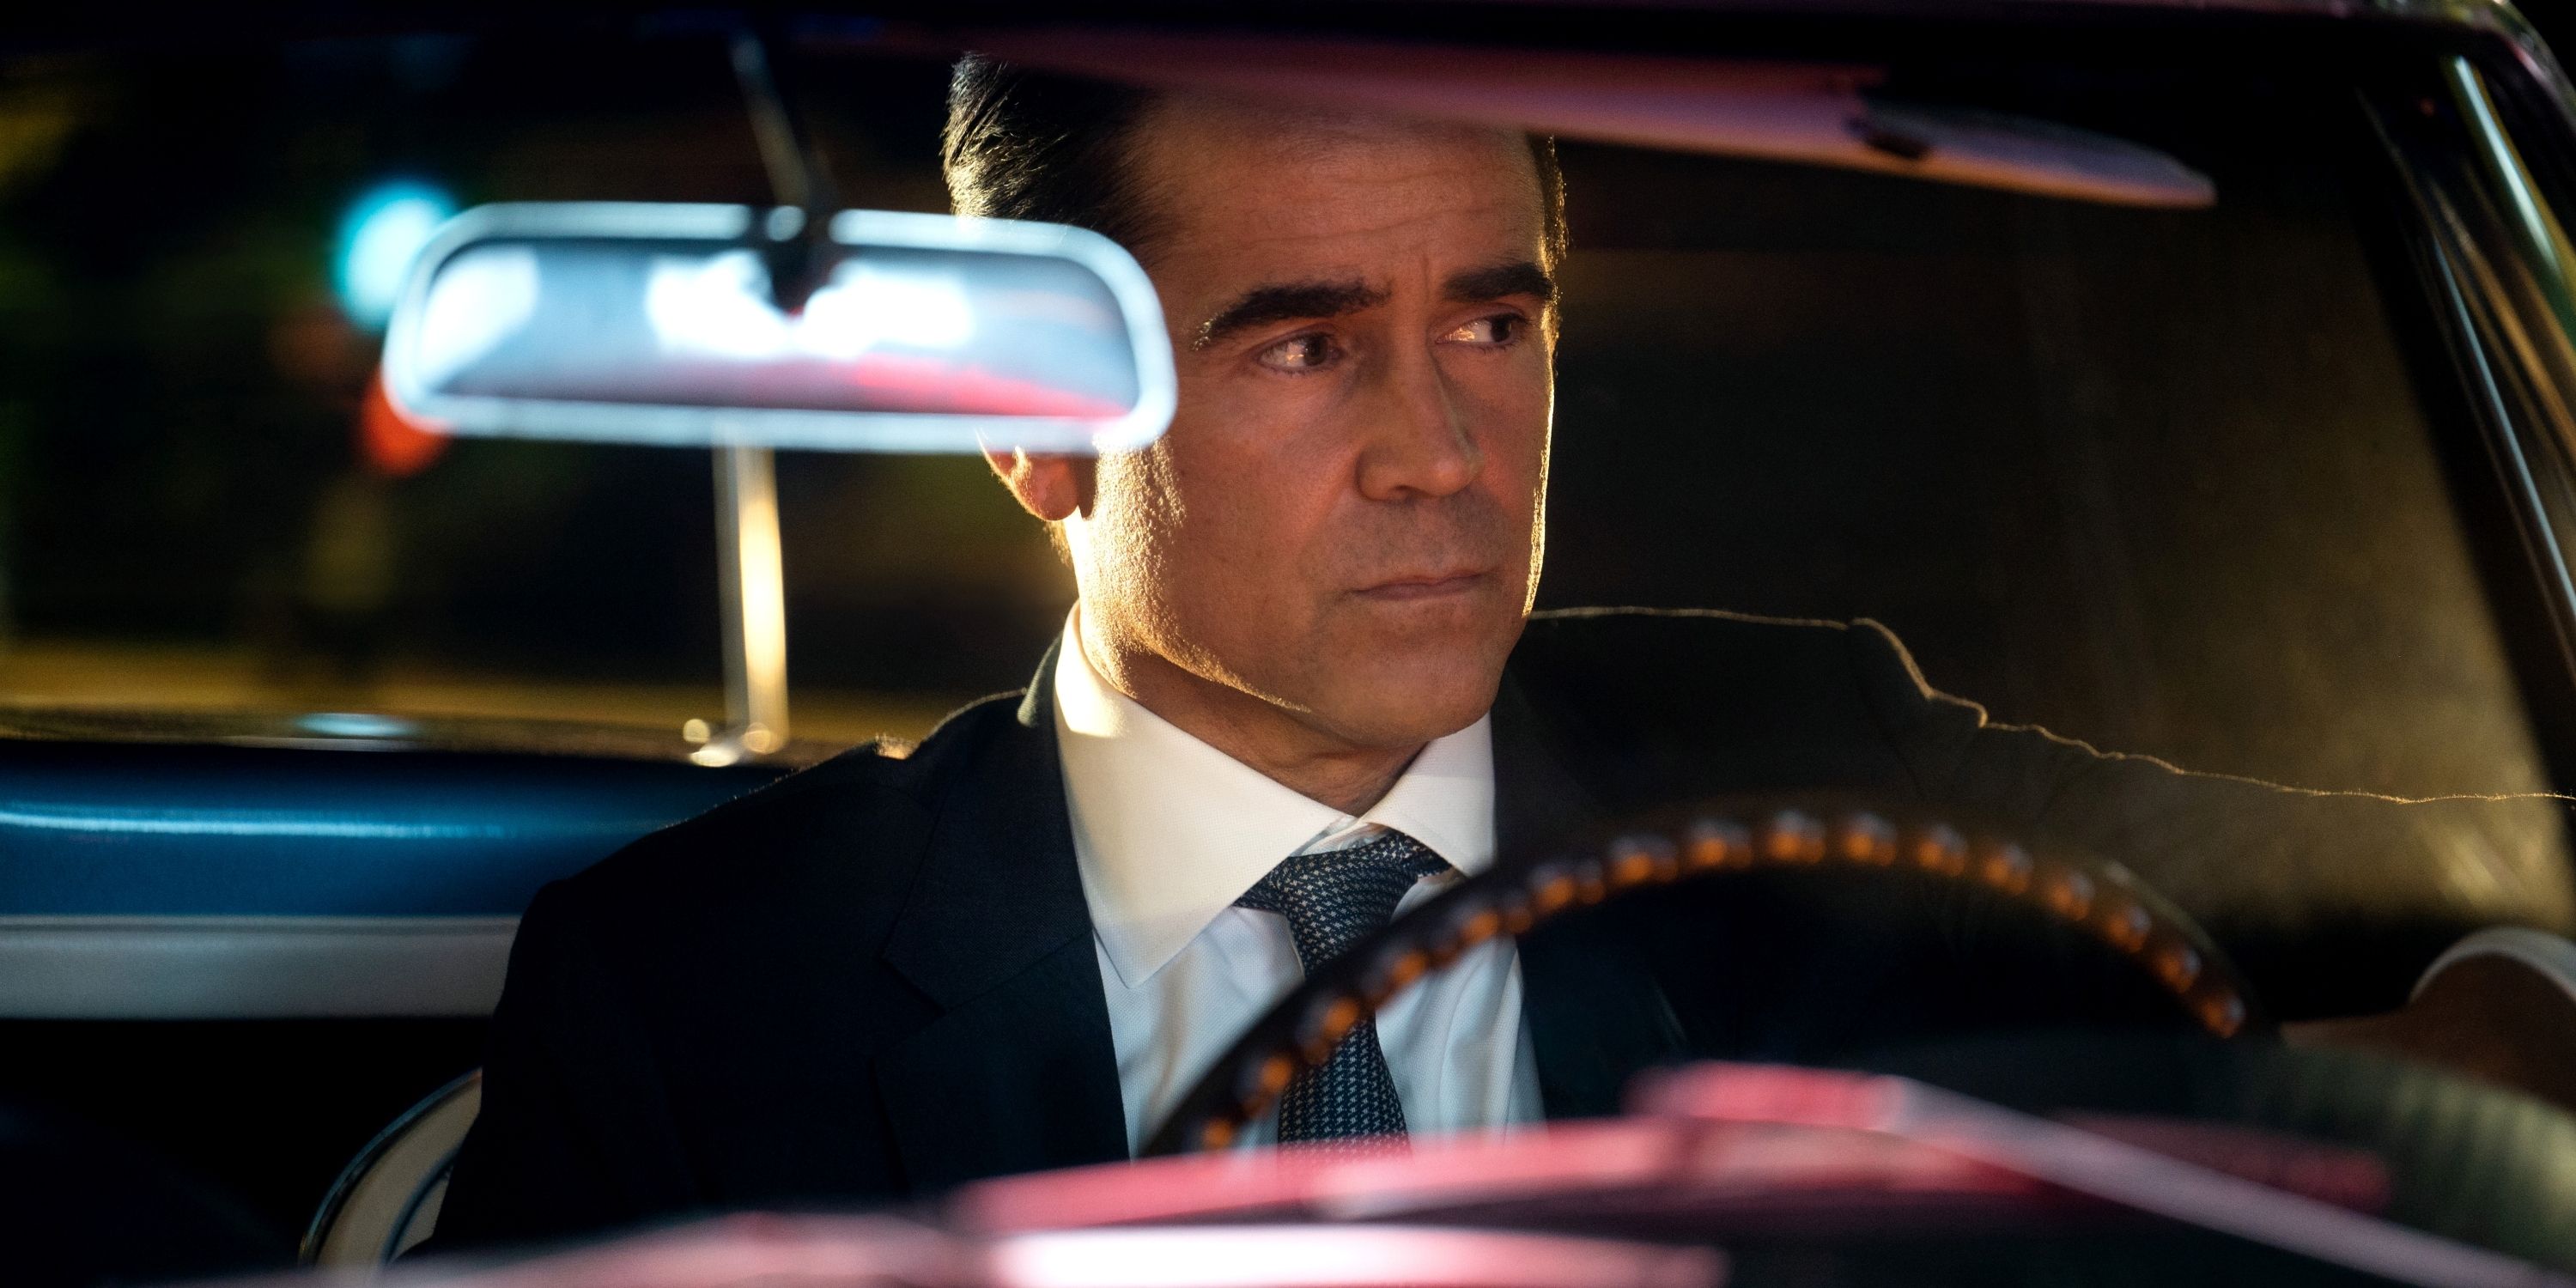 Colin Farrell as private detective John Sugar behind the wheel of a convertible car in Episode 2 of Sugar